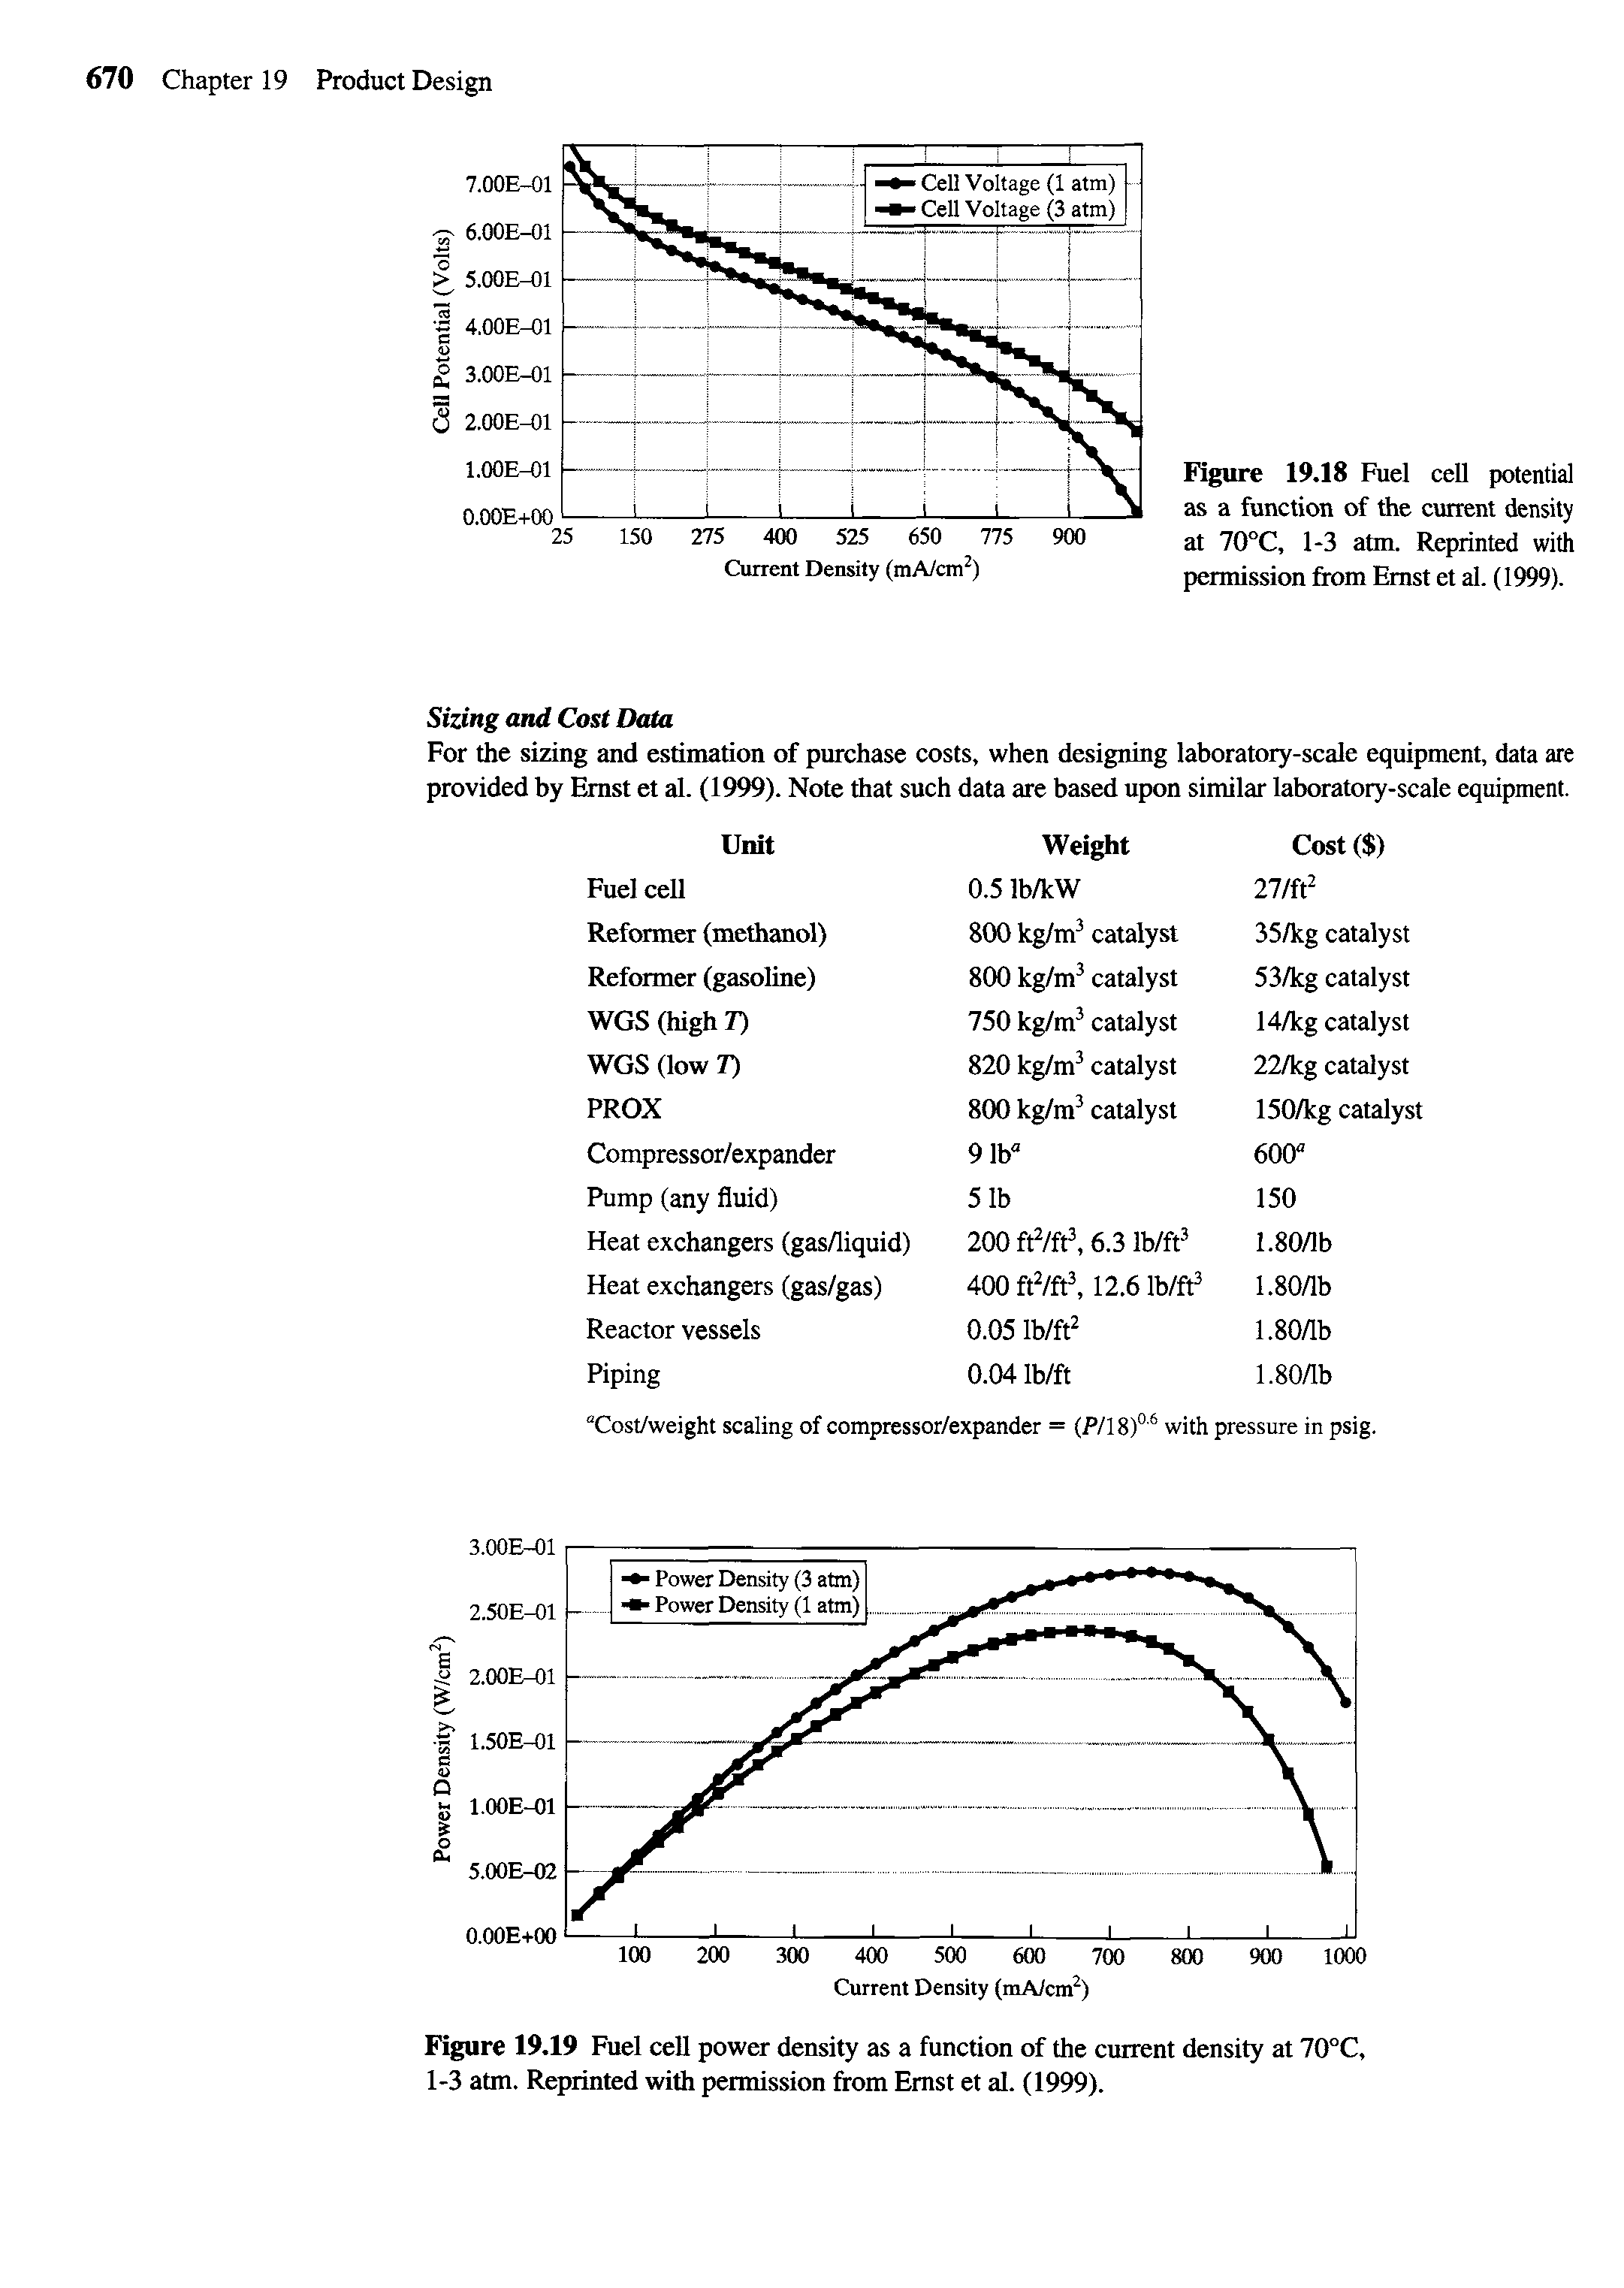 Figure 19.19 Fuel cell power density as a function of the current density at 70°C, 1-3 atm. Reprinted with permission from Ernst et al. (1999).